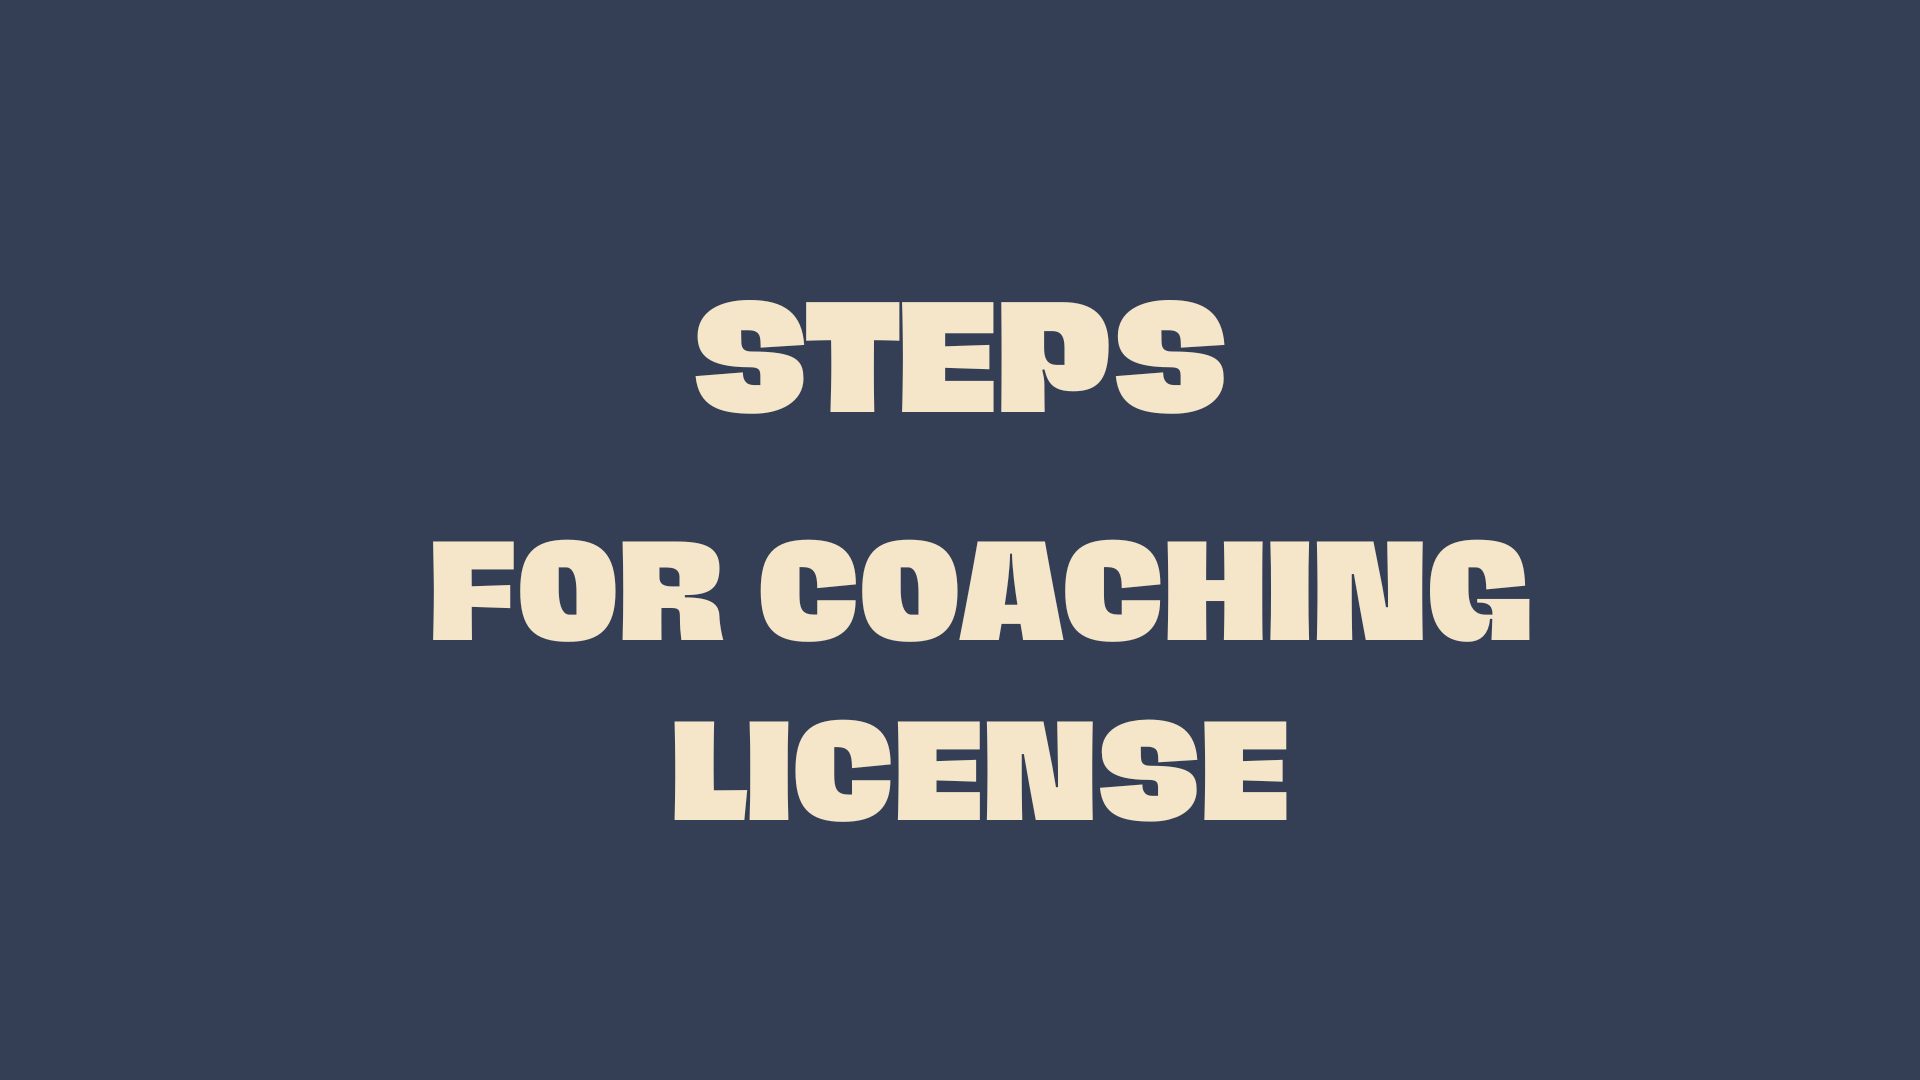 STEPS FOR COACHING LICENSE